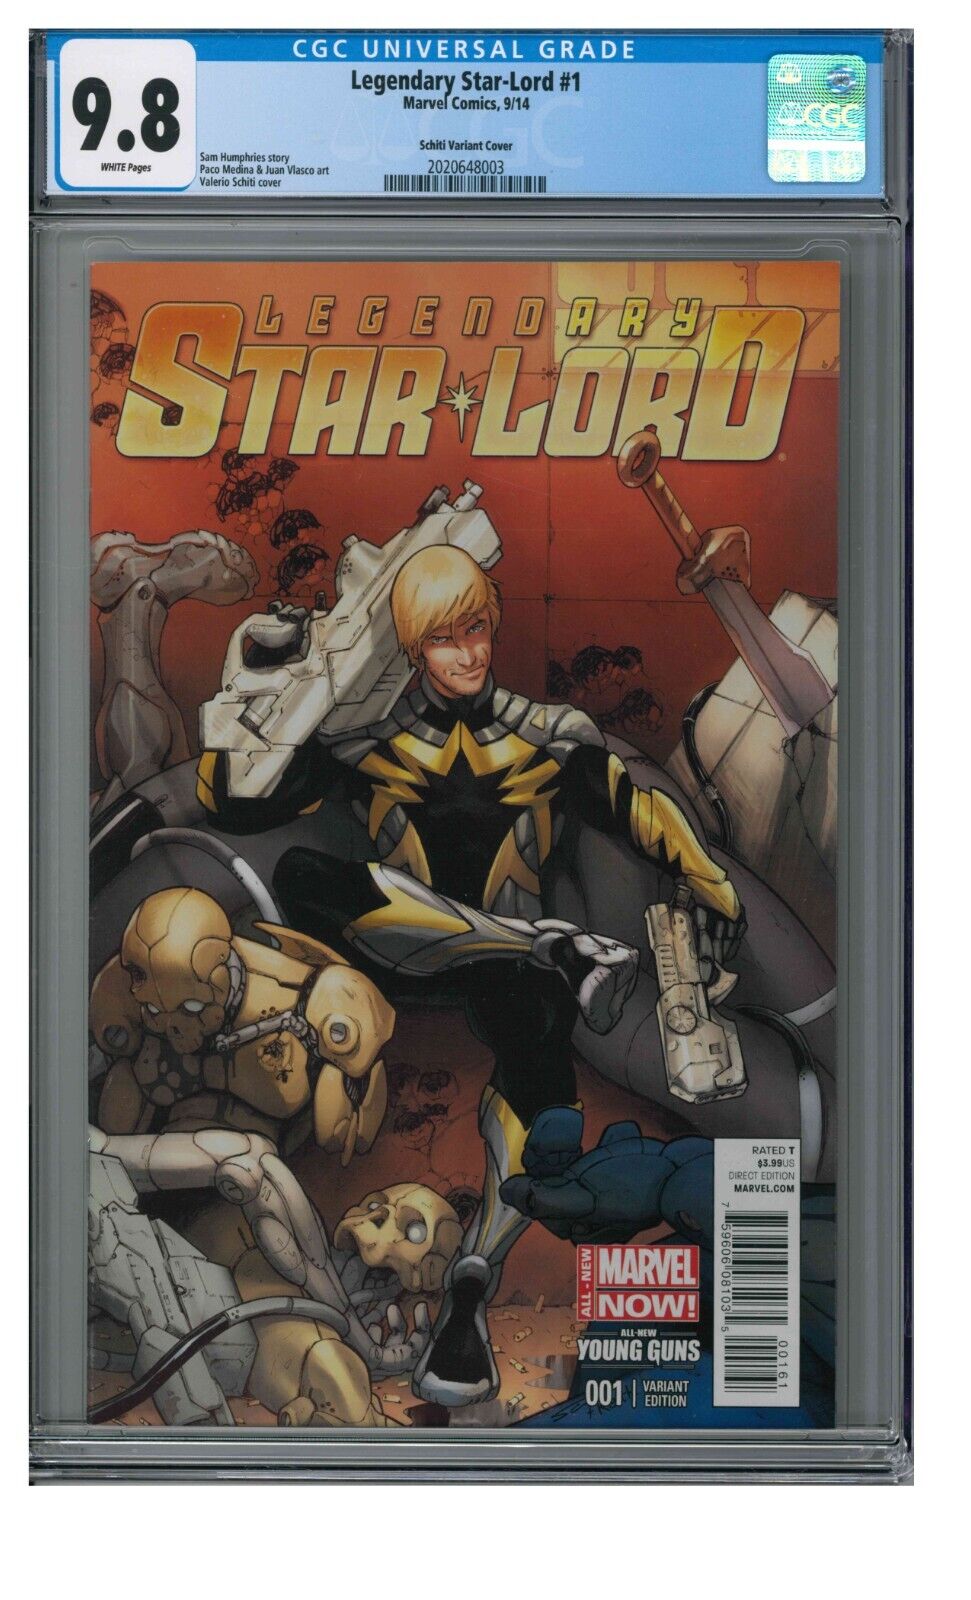 Legendary Star-Lord #1 (2014) Schiti Variant CGC 9.8 White Pages JJ841